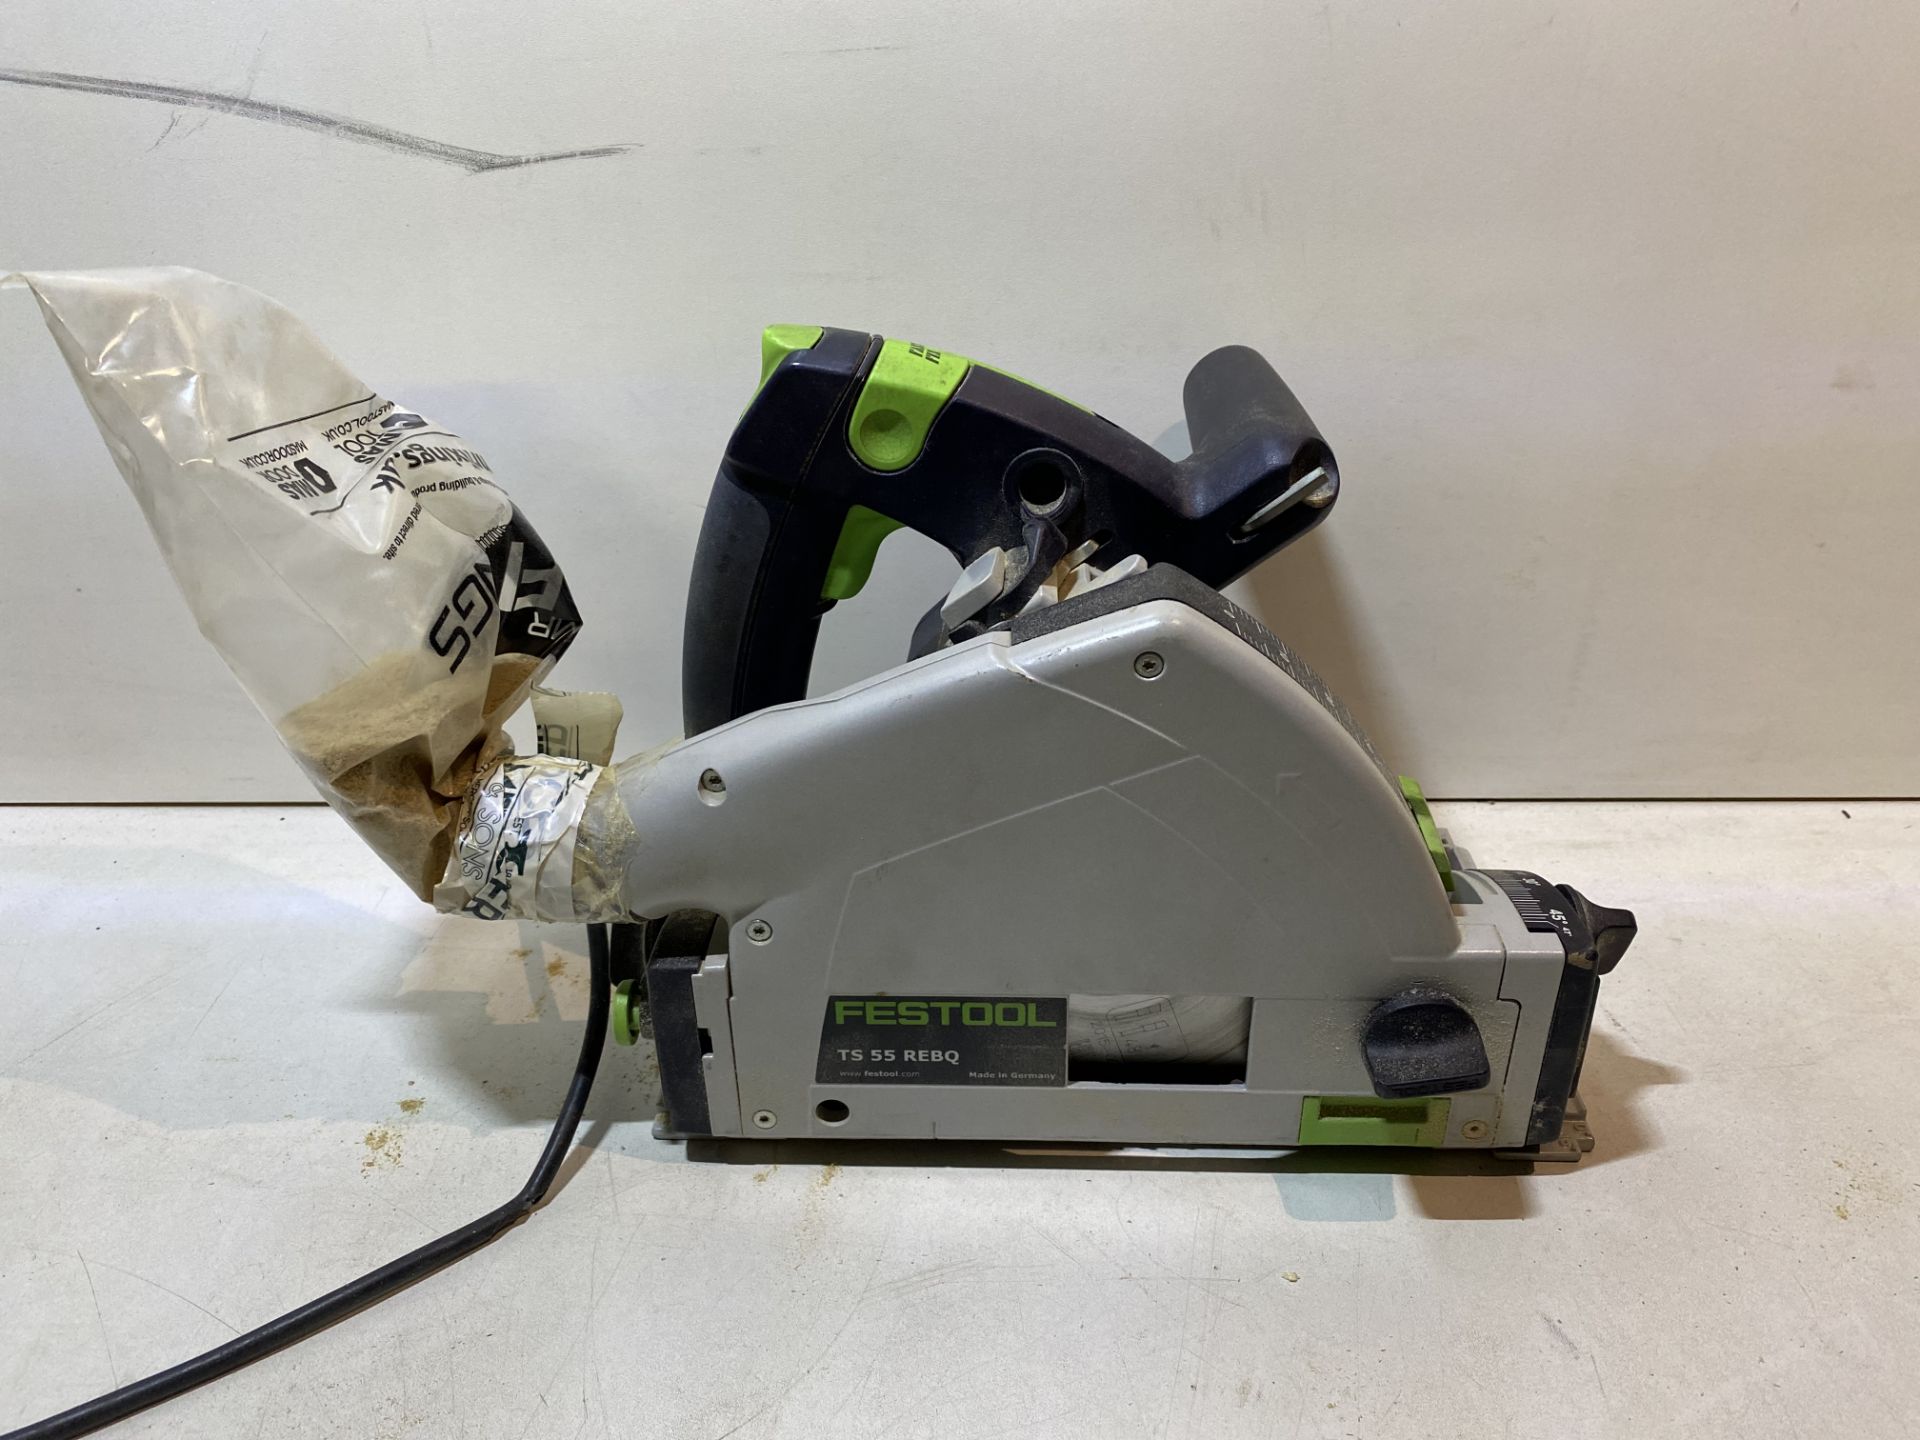 USED 561553 CIRCULAR PLUNGE SAW TS 55 REBQ-PLUS GB 240V - Missing Additional Parts - SEE PICTURES - Image 2 of 8